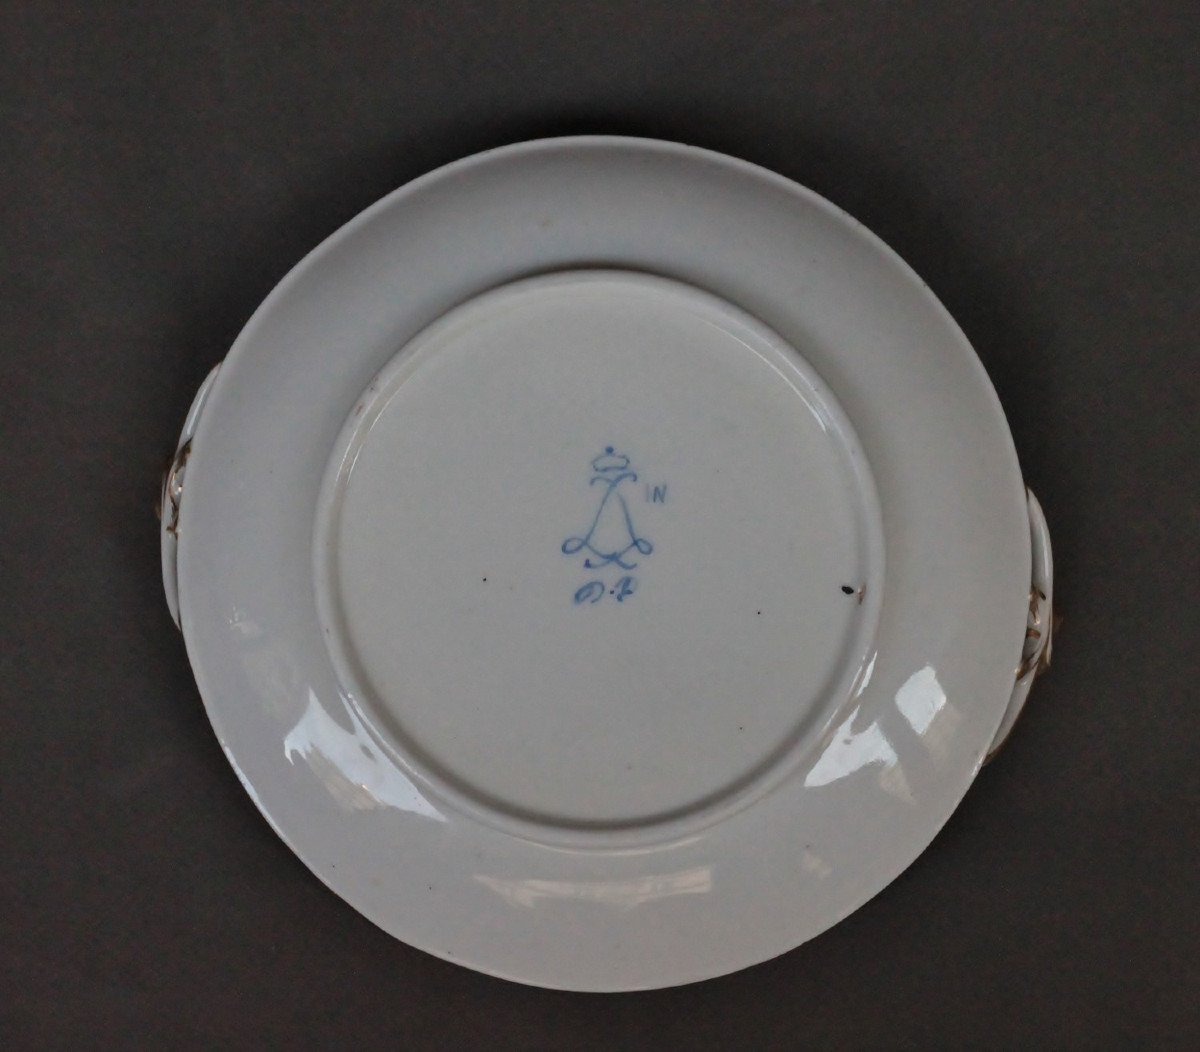 Tender Porcelain Bowl From Sèvres, Dd 1781, Sioux Painter And Gilder Chauvaux, 18th Century-photo-2